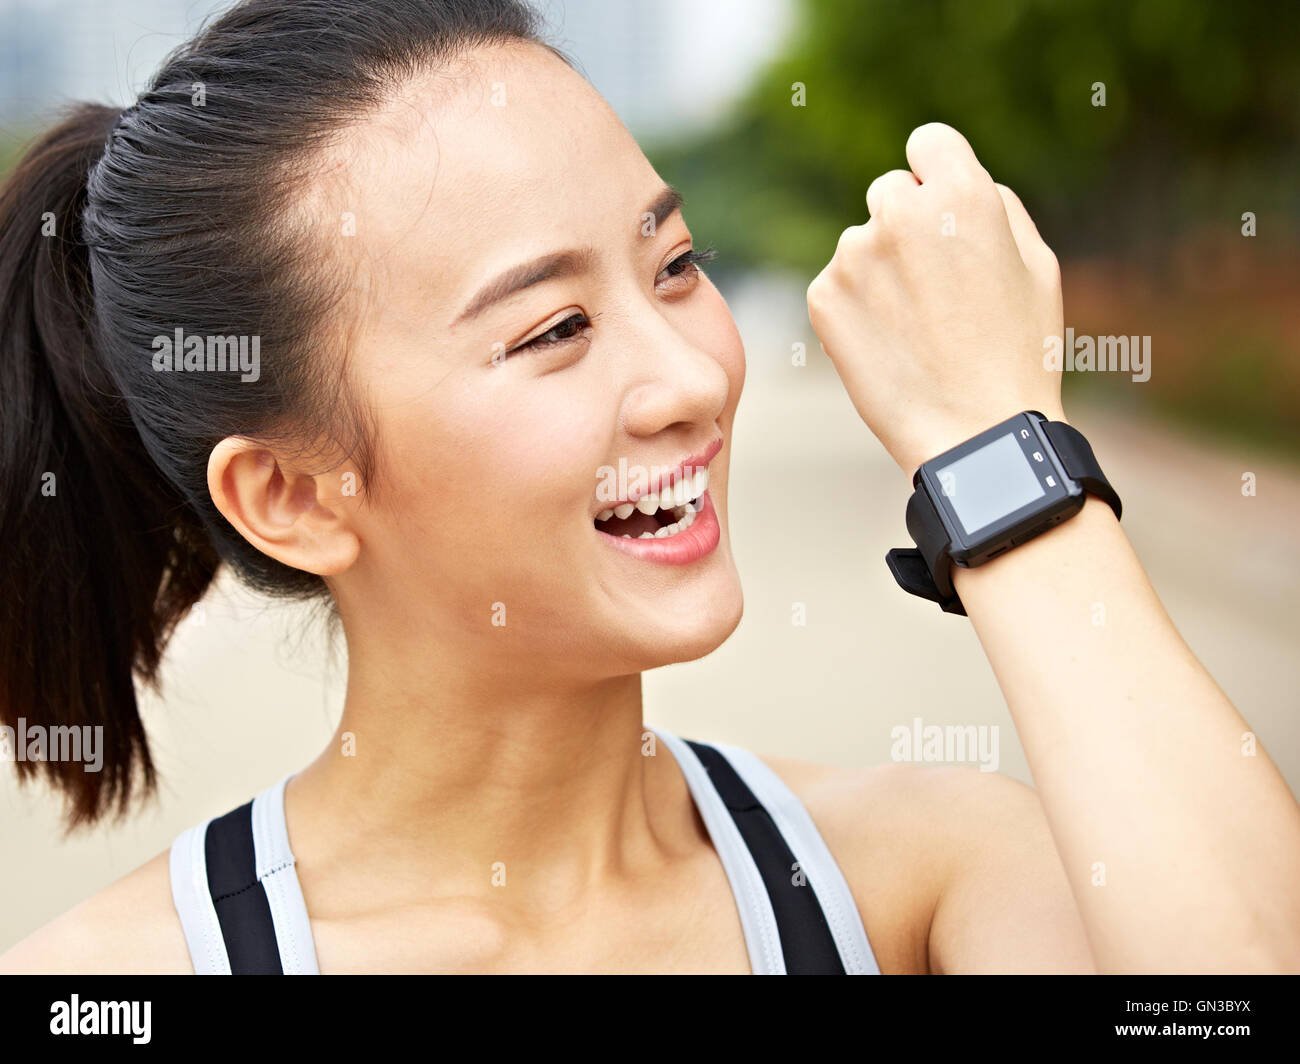 young asian woman jogger answering or making a call using a wrist watch wearable device. Stock Photo